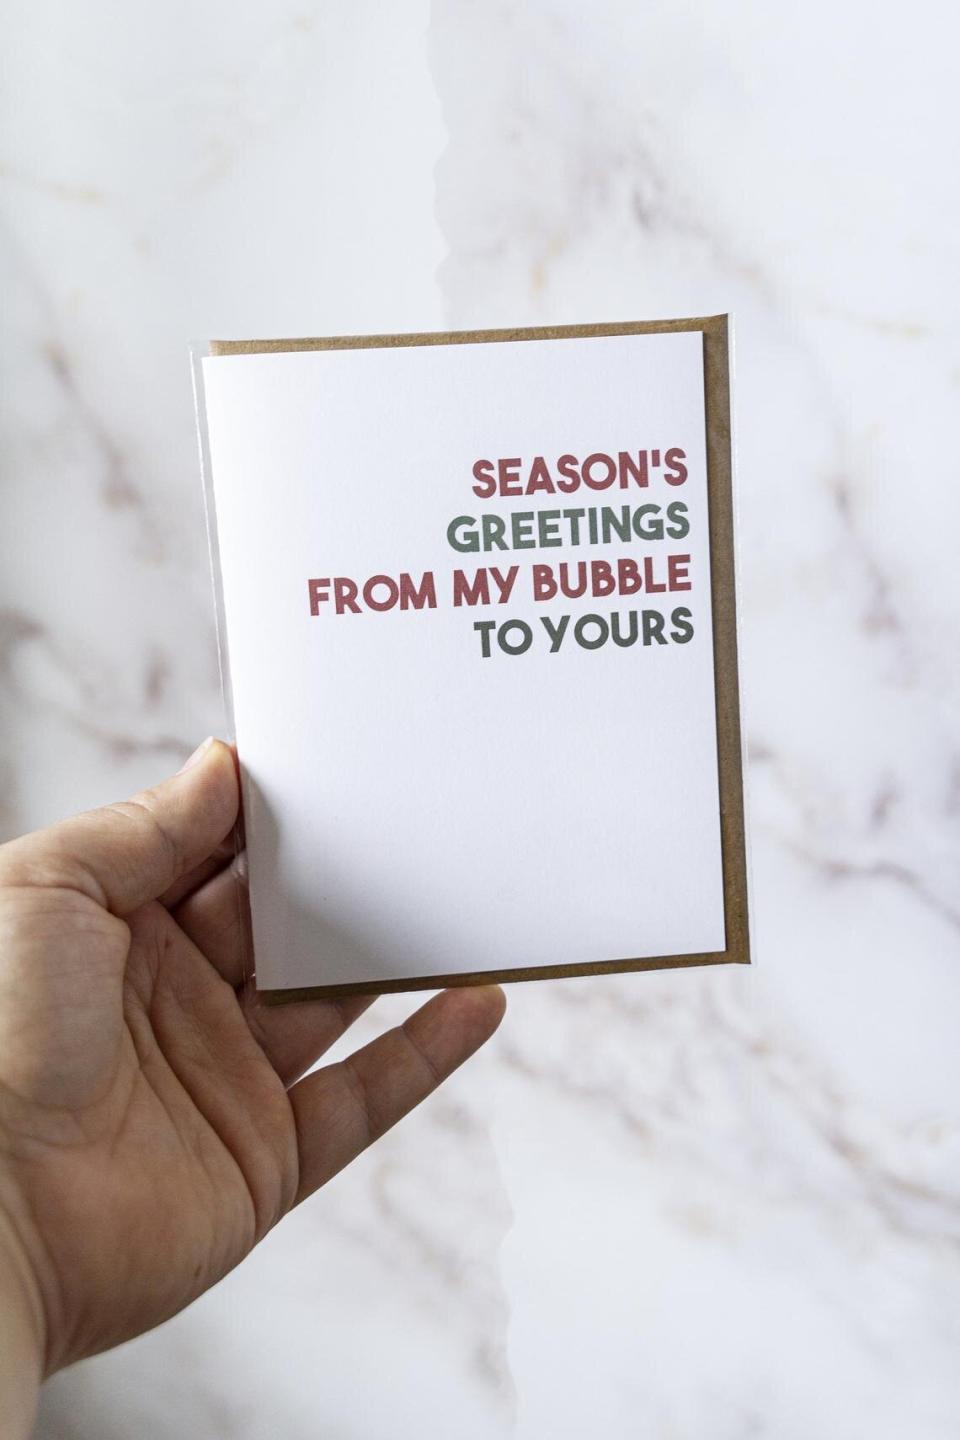 Buy it from <a href="https://www.etsy.com/listing/893905087/seasons-greetings-from-my-bubble-to" target="_blank" rel="noopener noreferrer">katushaco on Etsy</a> for $4.08